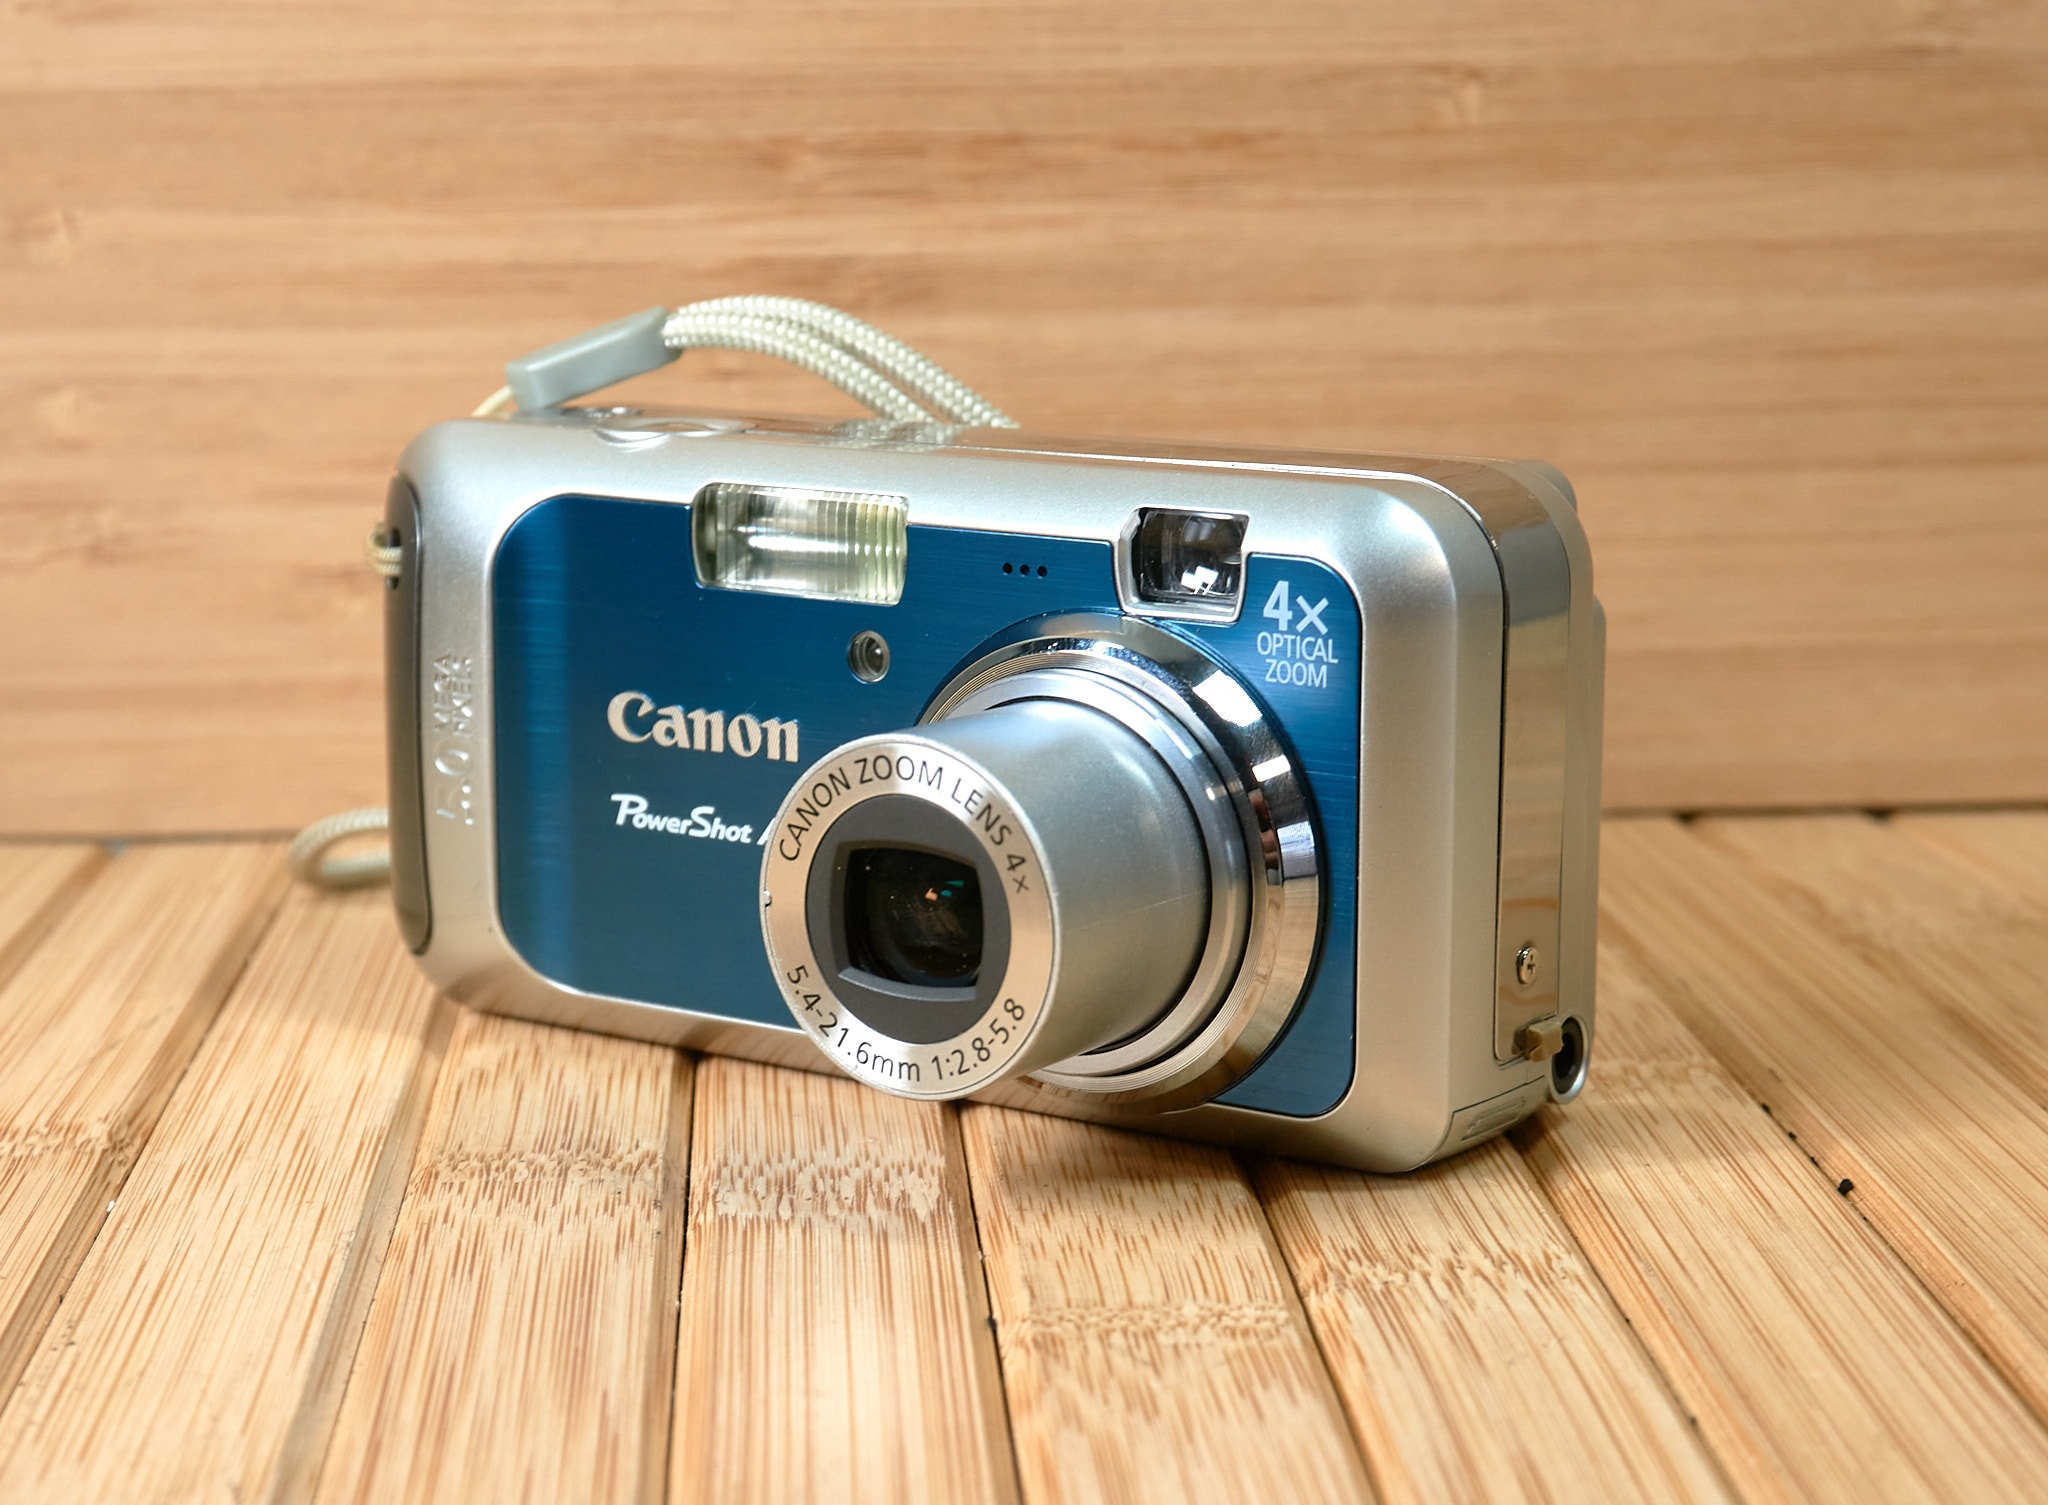 Canon Powershot A460 5.0MP Digital Camera With 4X Optical Zoom 